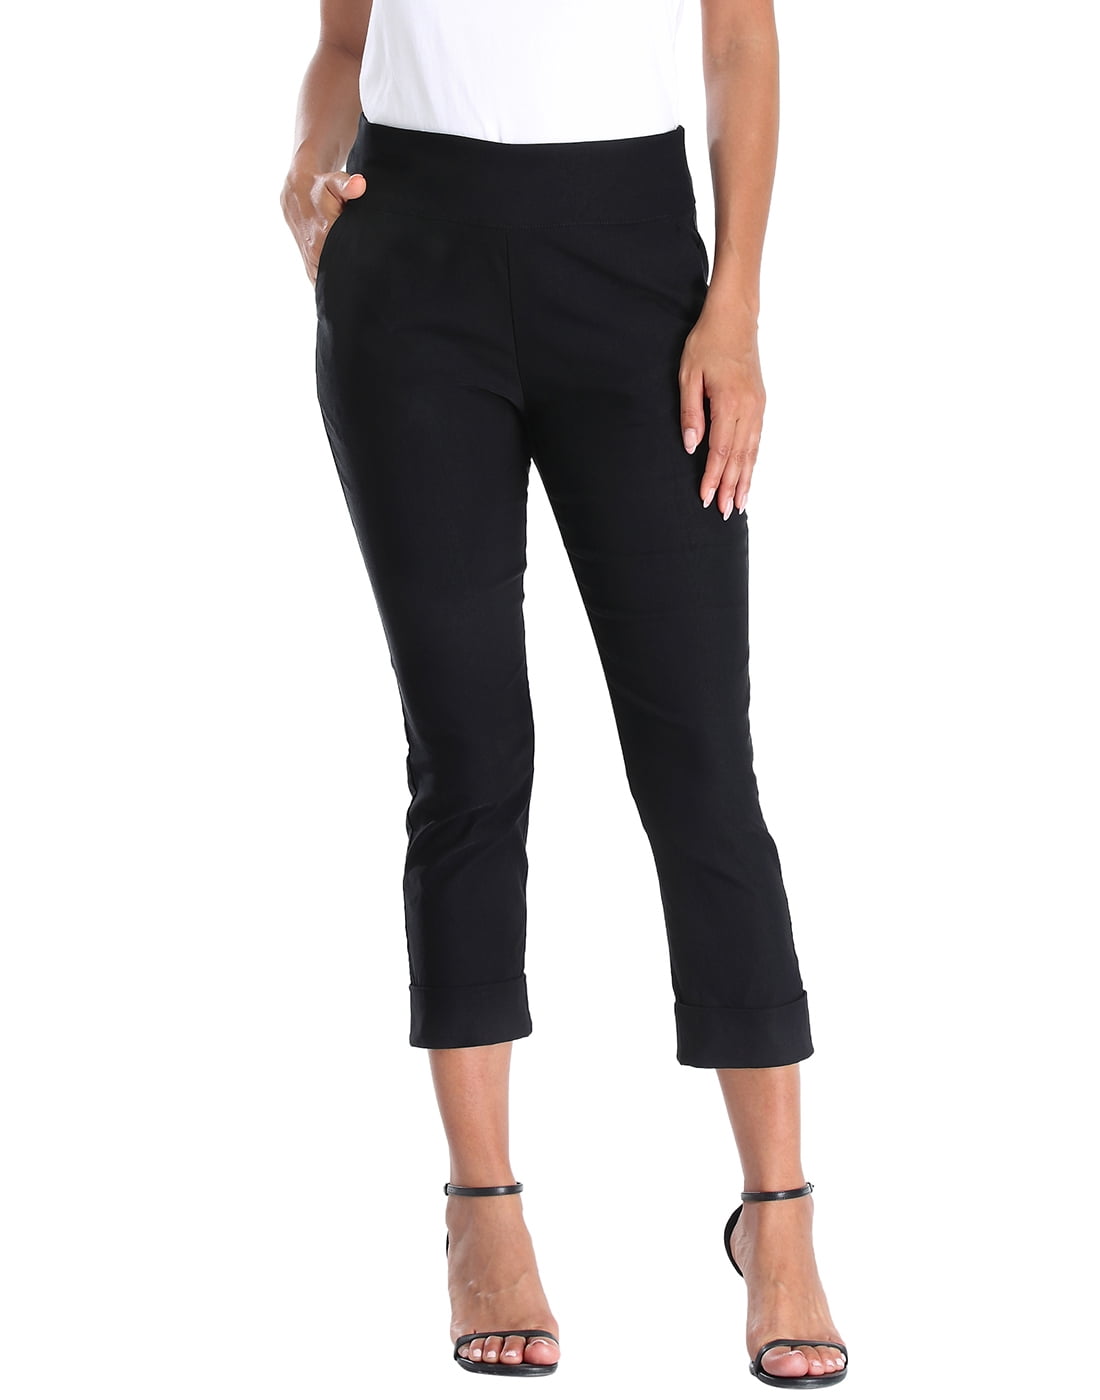 Time and Tru Women's High Rise Pull On Capri Jeggings, 23 Inseam